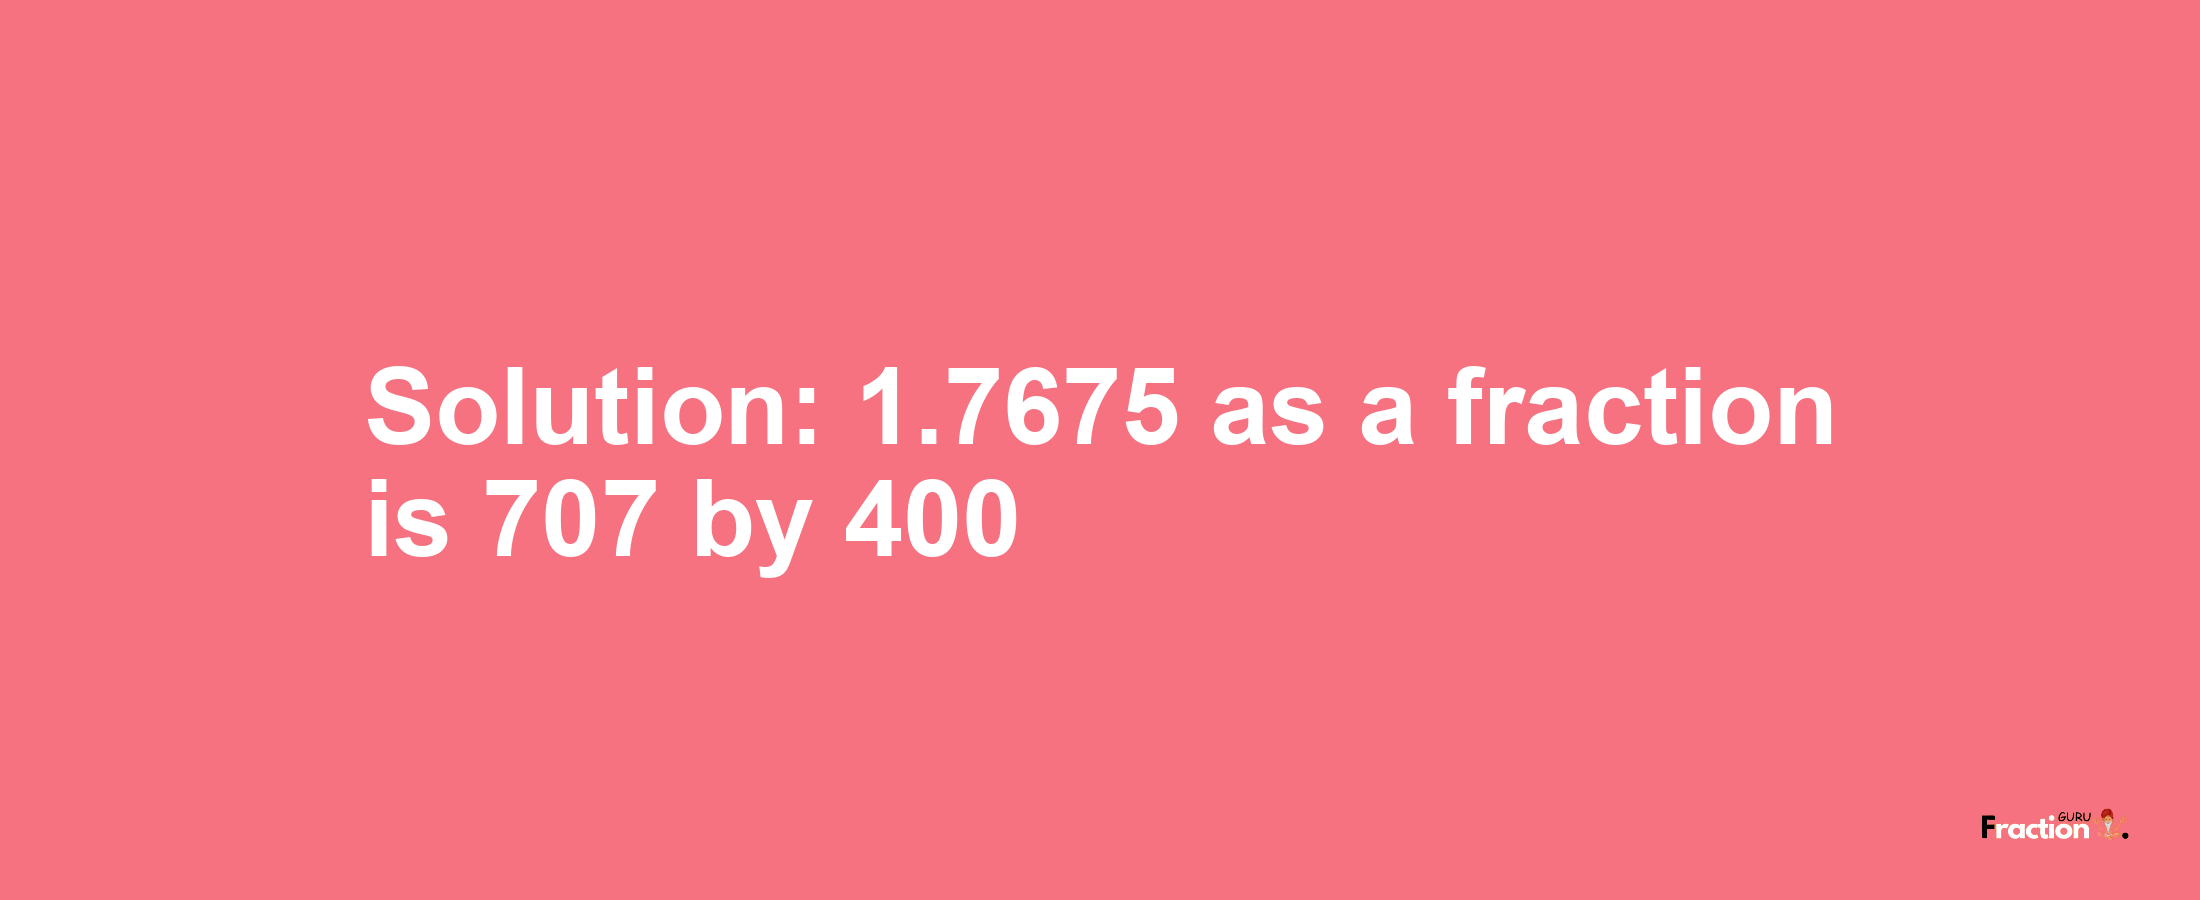 Solution:1.7675 as a fraction is 707/400